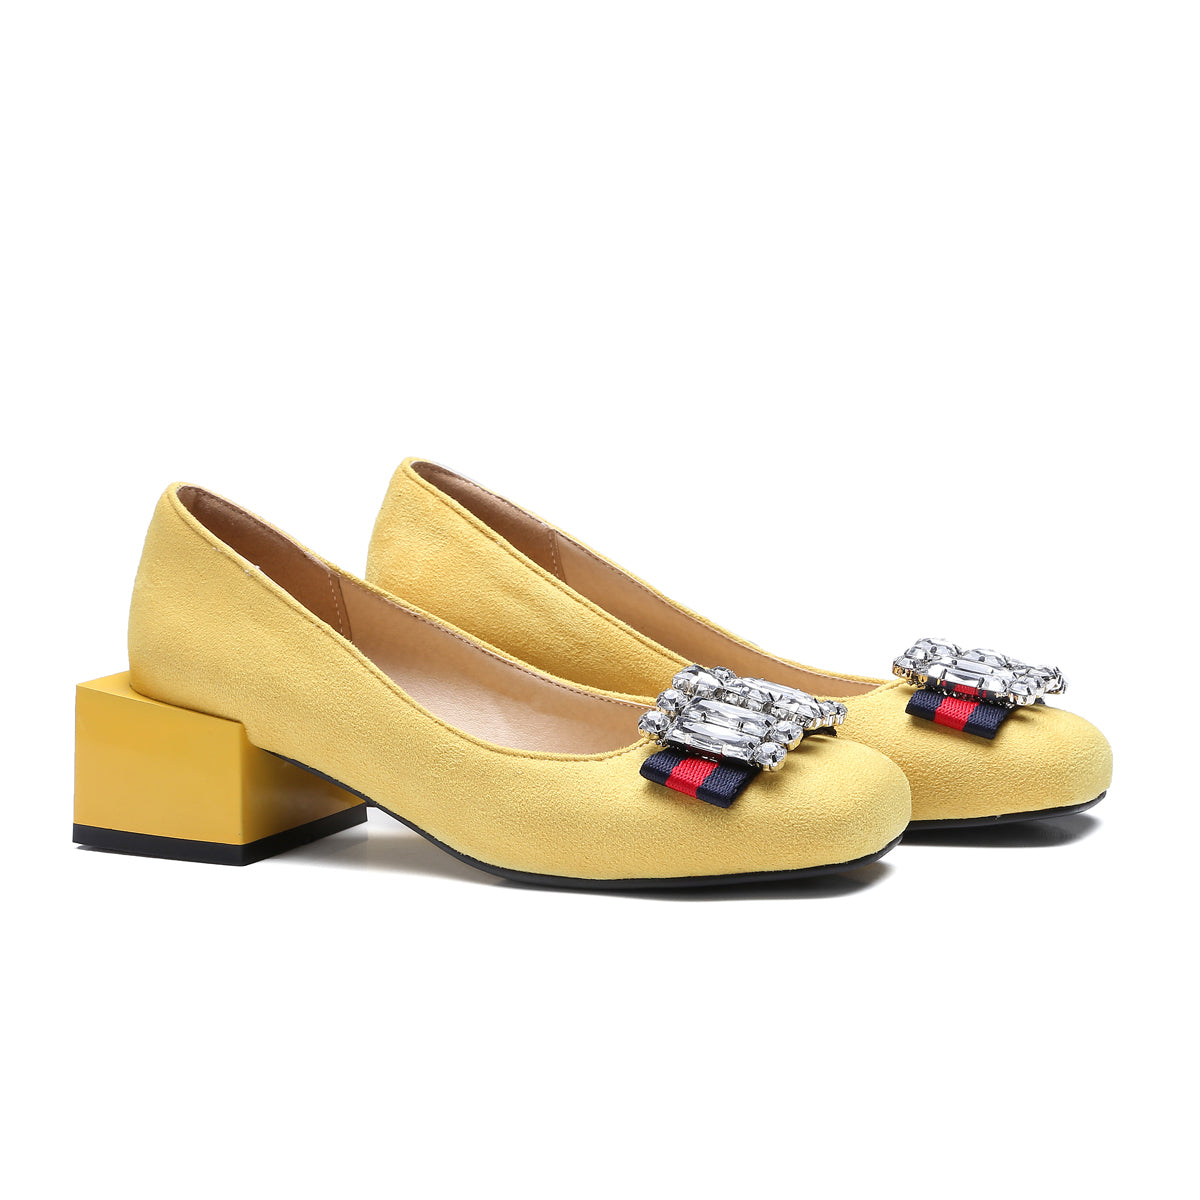 Bigsizeheels Suede square toe rhinestones with thick heels - Yellow freeshipping - bigsizeheel®-size5-size15 -All Plus Sizes Available!